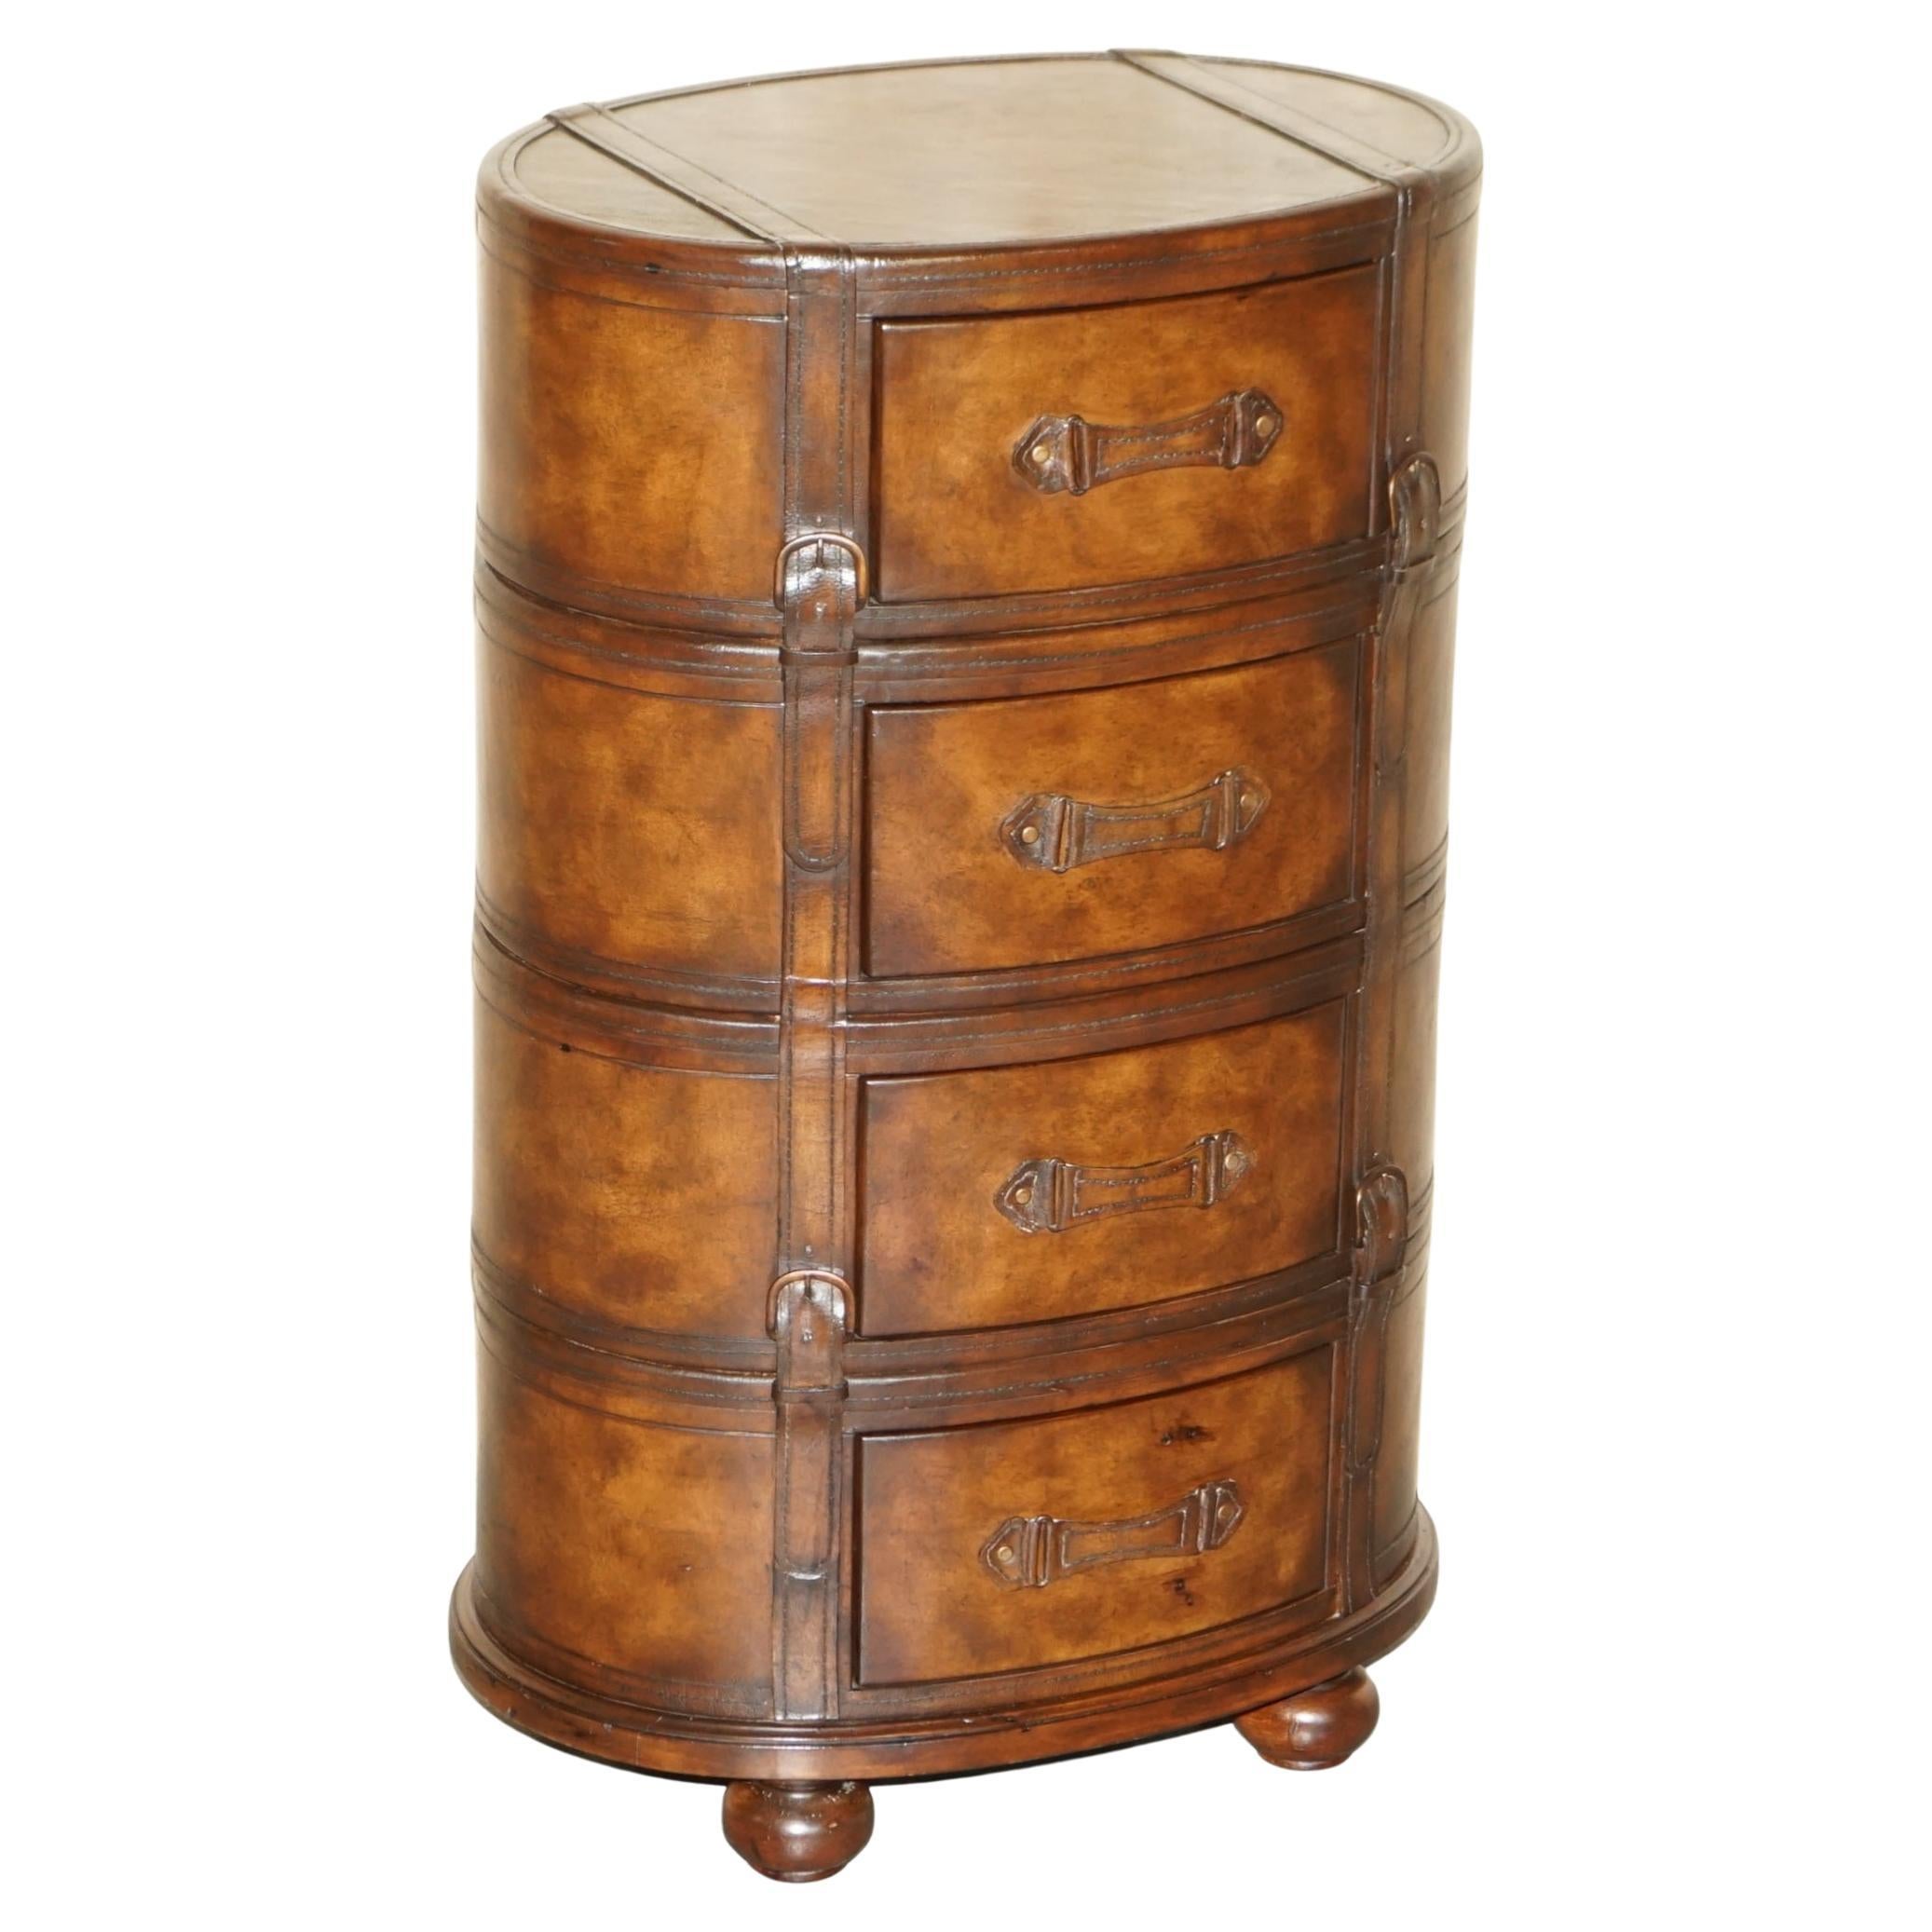 Brown Leather Oval Tallboy Chest of Drawers with Luggage Style Straps or Belts